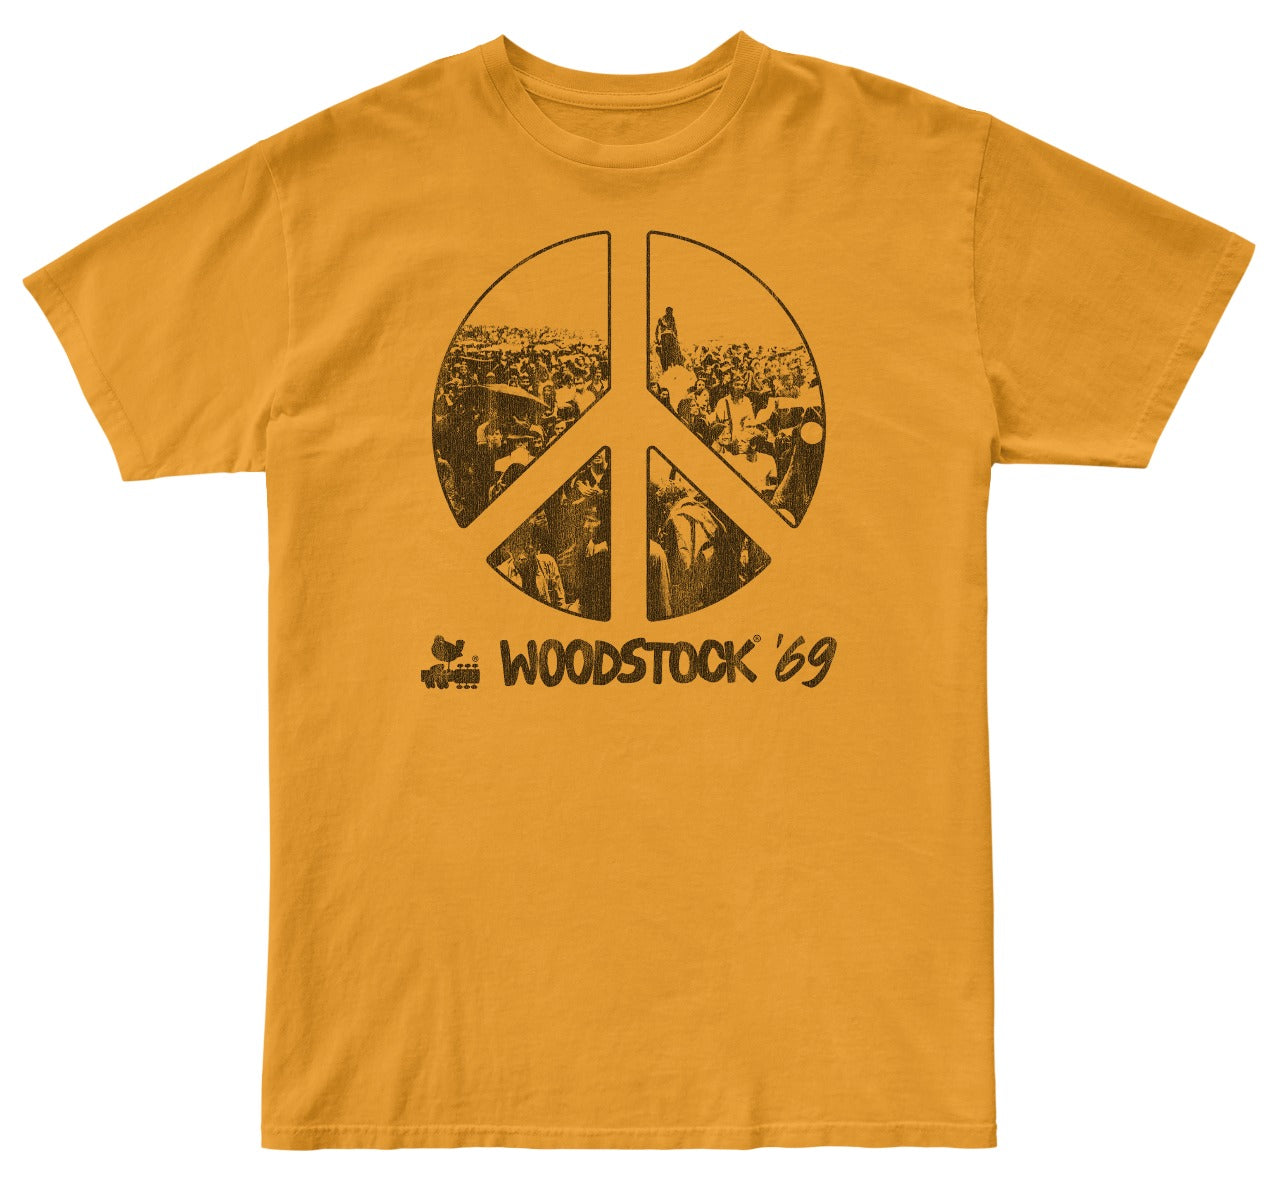 Woodstock '69 with peace logo centered above - faded black print on our 100% cotton unisex tee in yellow.